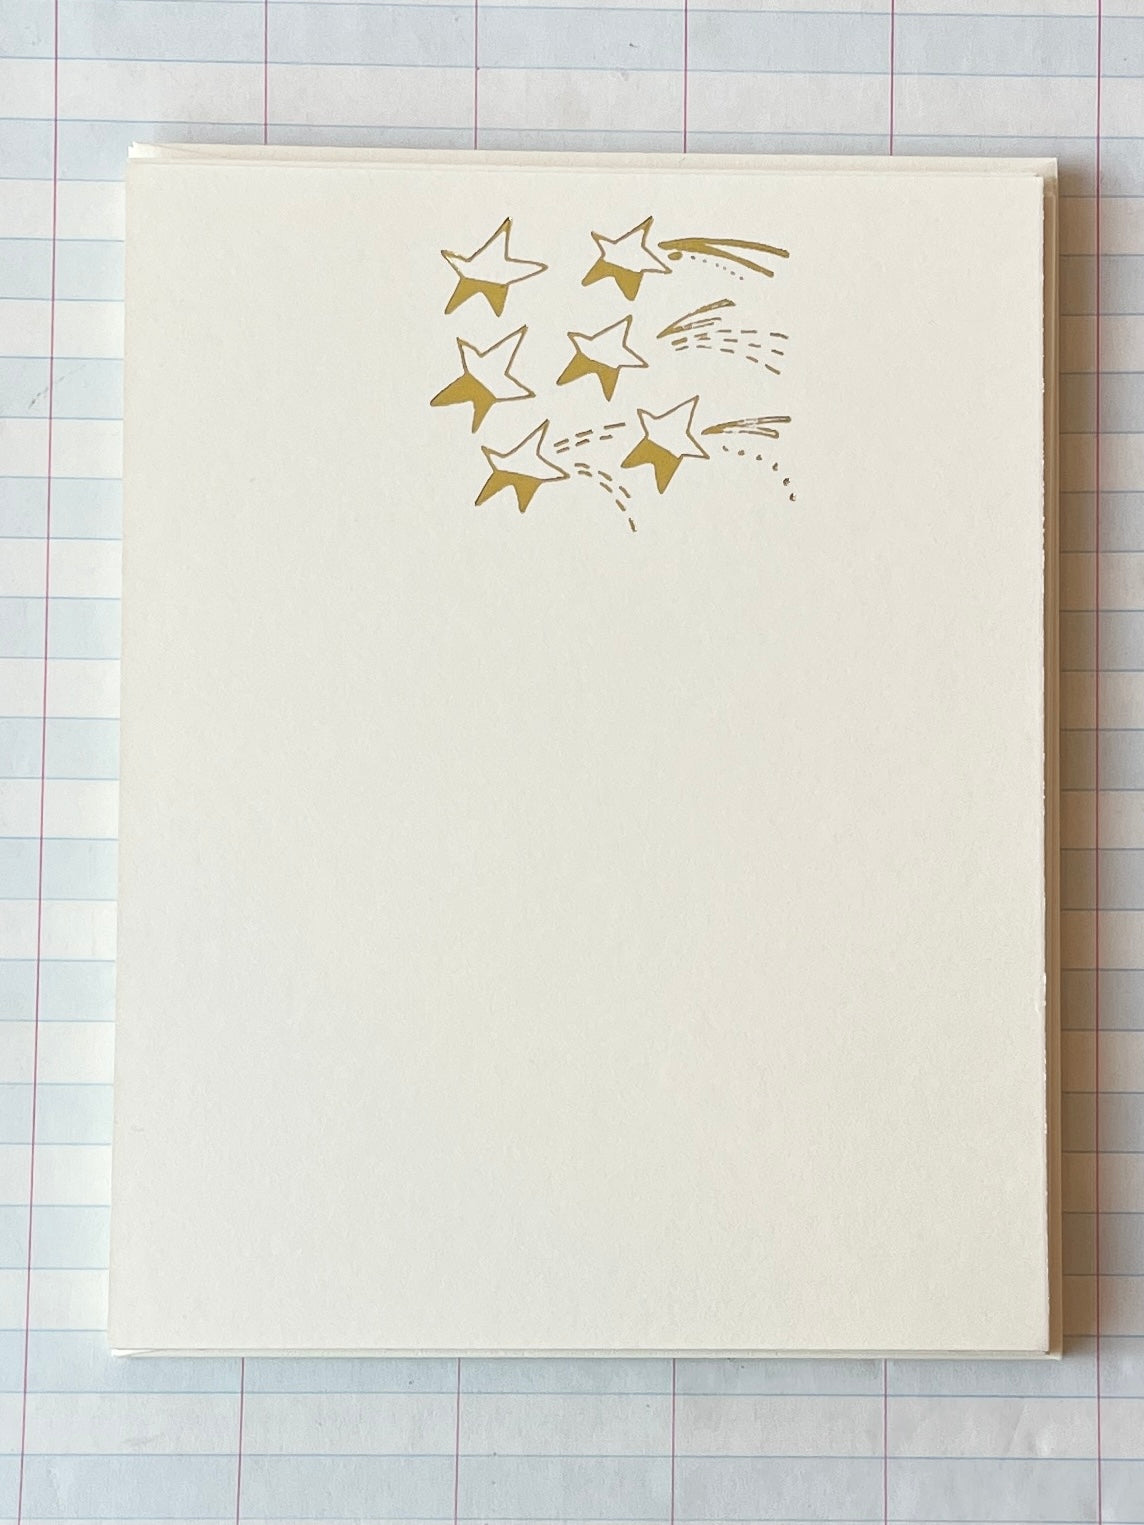 Shooting Stars by Skippy Cotton Foil Pressed Stationery